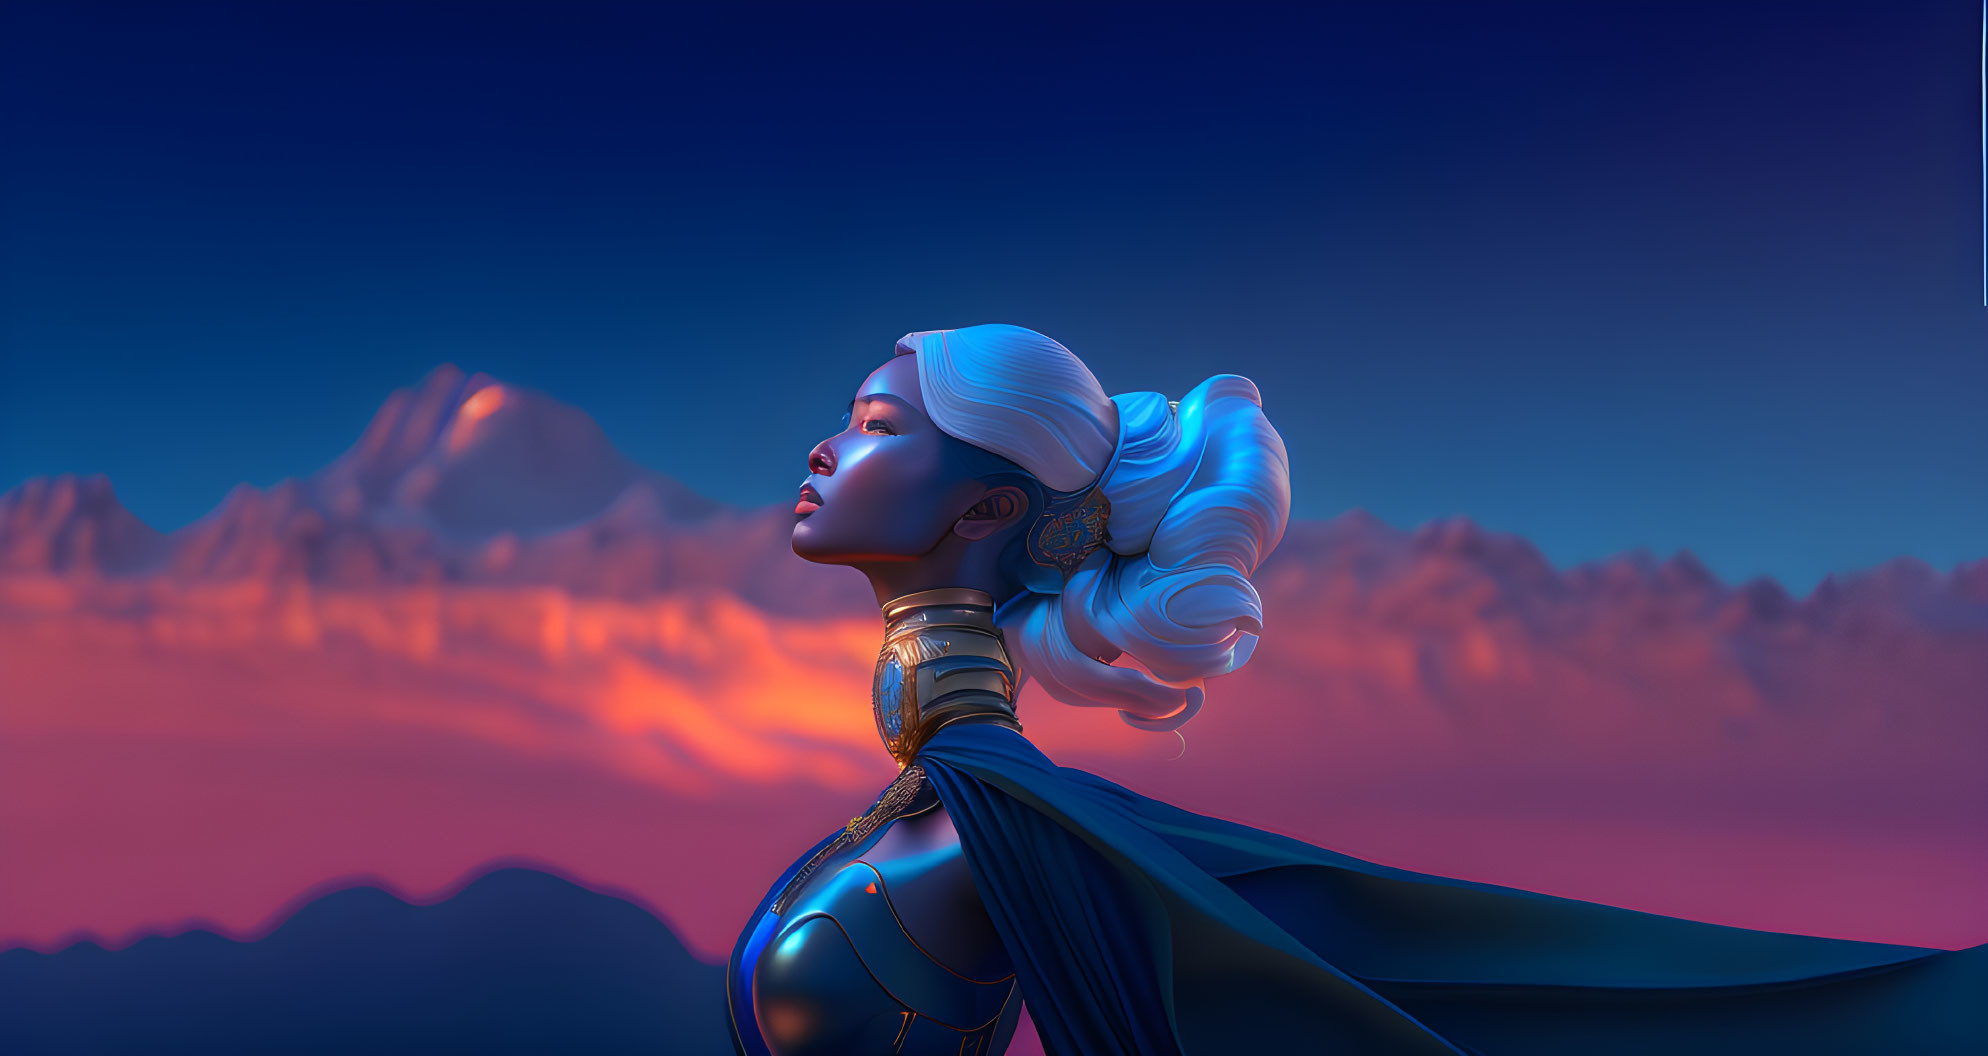 Stylized animated female character in white hair and blue armor against mountain backdrop at sunset